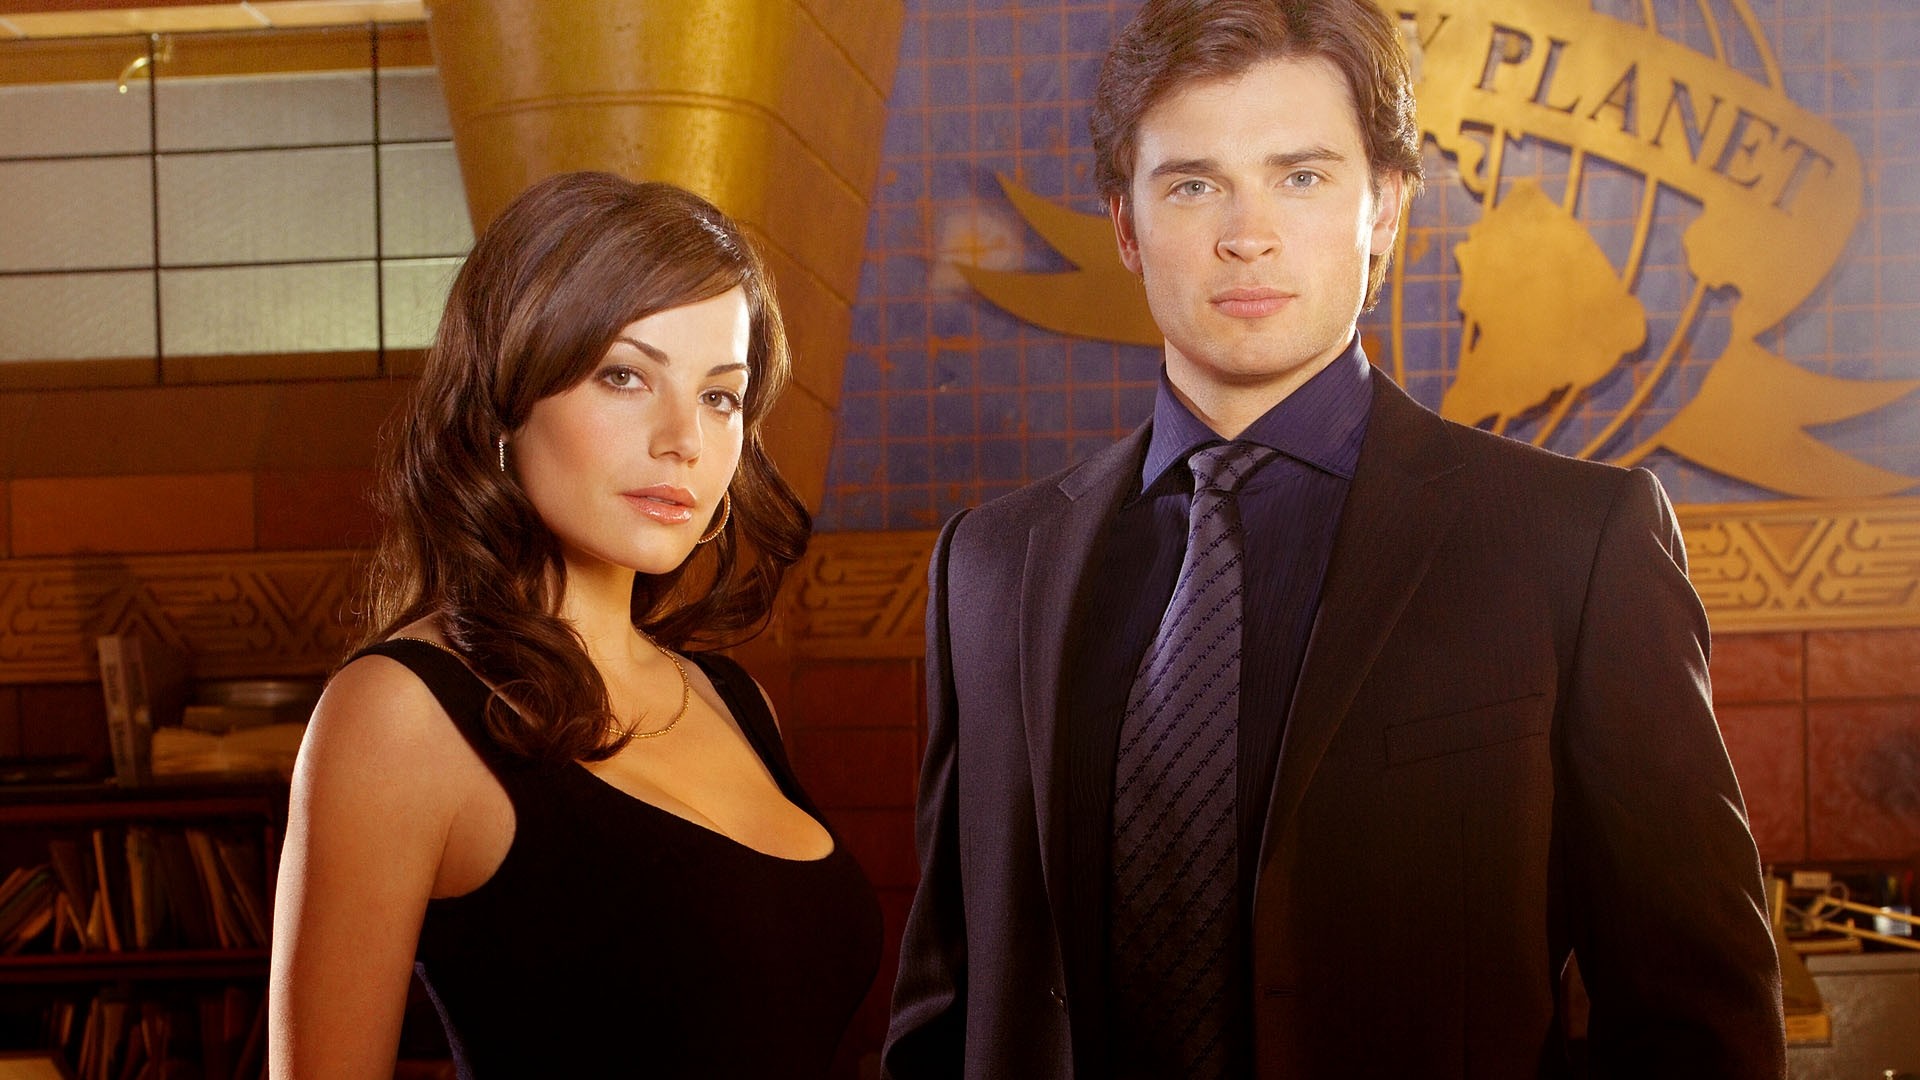 1920x1080 Smallville Source: Keys: smallville, television, wallpaper, wallpapers.  Submitted Anonymously 5 years ago